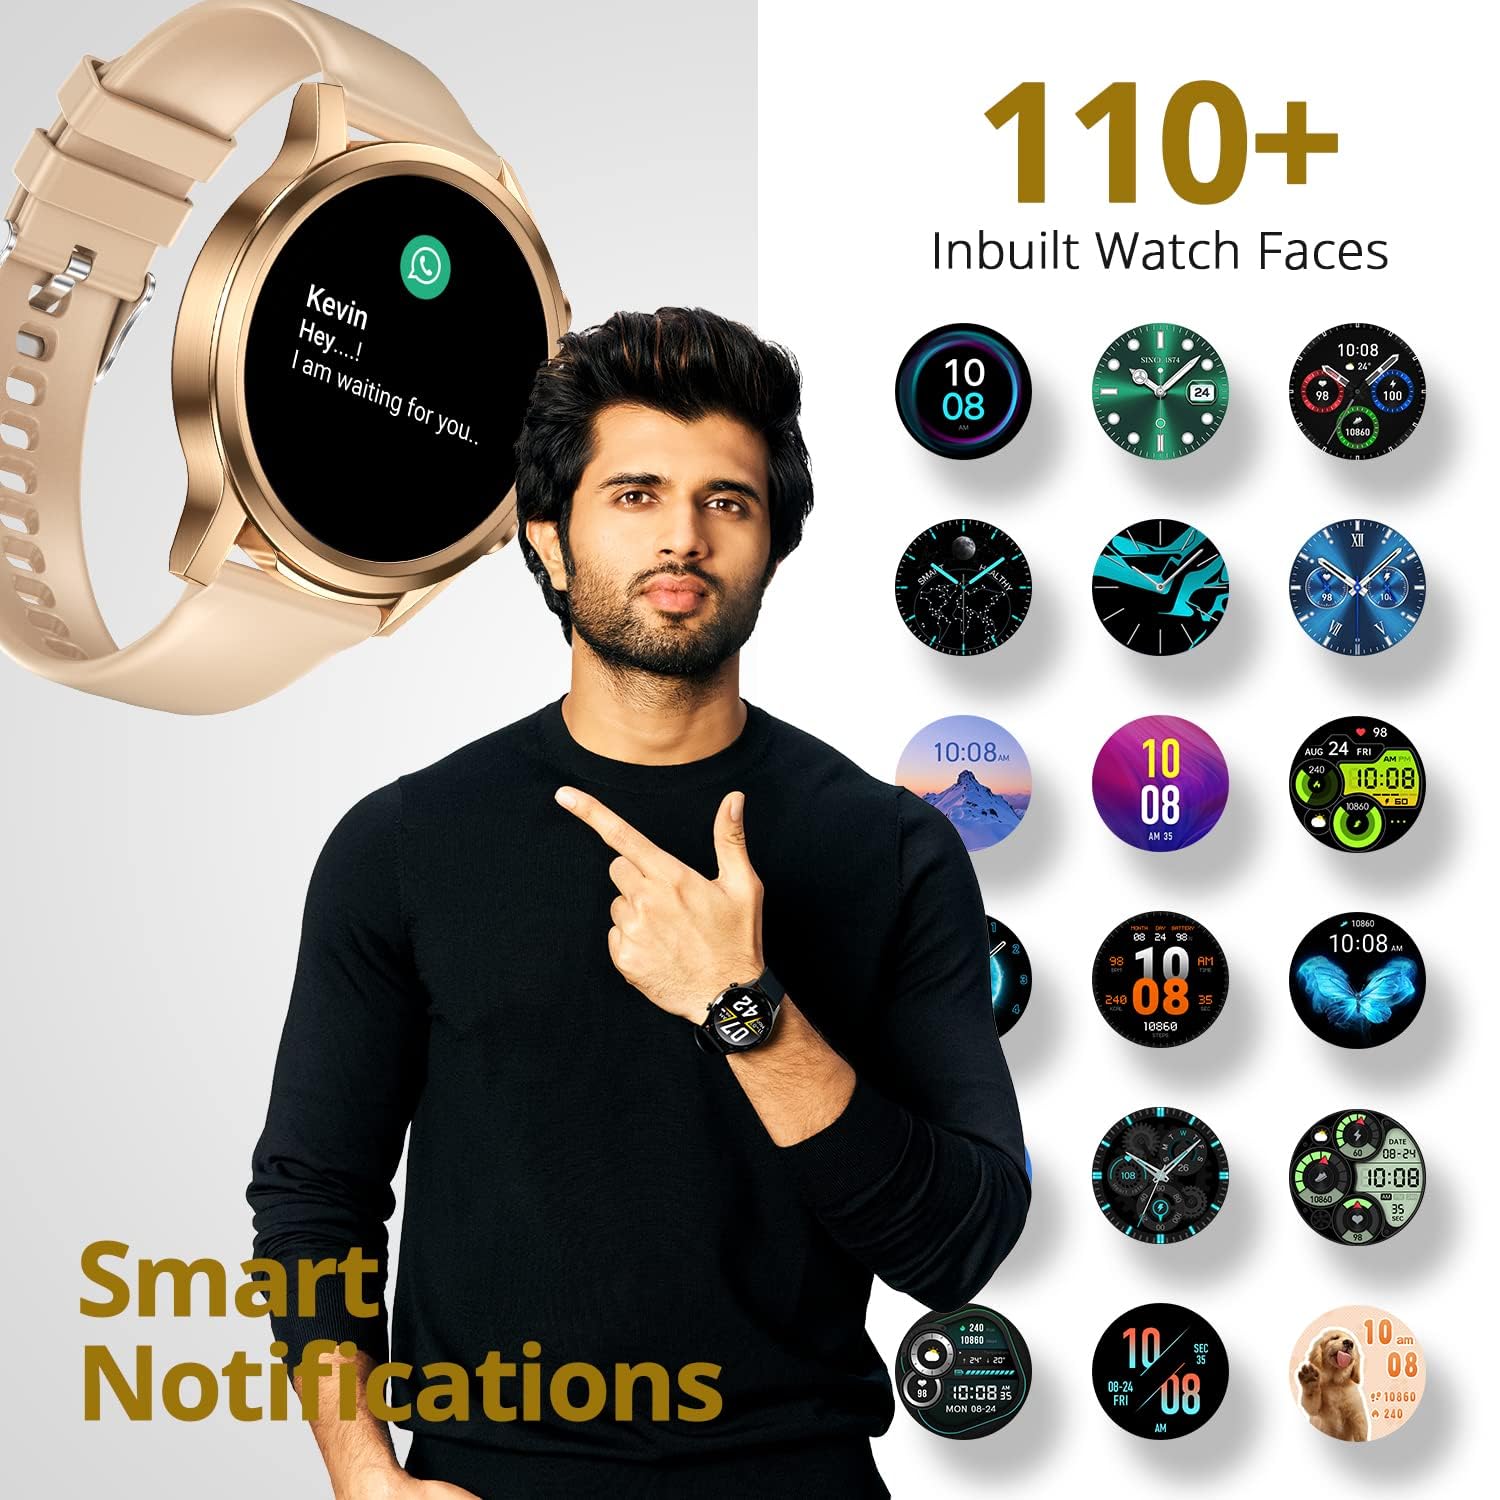 Fire-Boltt Infinity 1.6" Round Display Smart Watch, 400*400 Pixel High Resolution, Bluetooth Calling with Voice Assistance, 300 Plus Sports Modes & Internal Storage of 4GB to Store 300+ Songs, Rose Gold